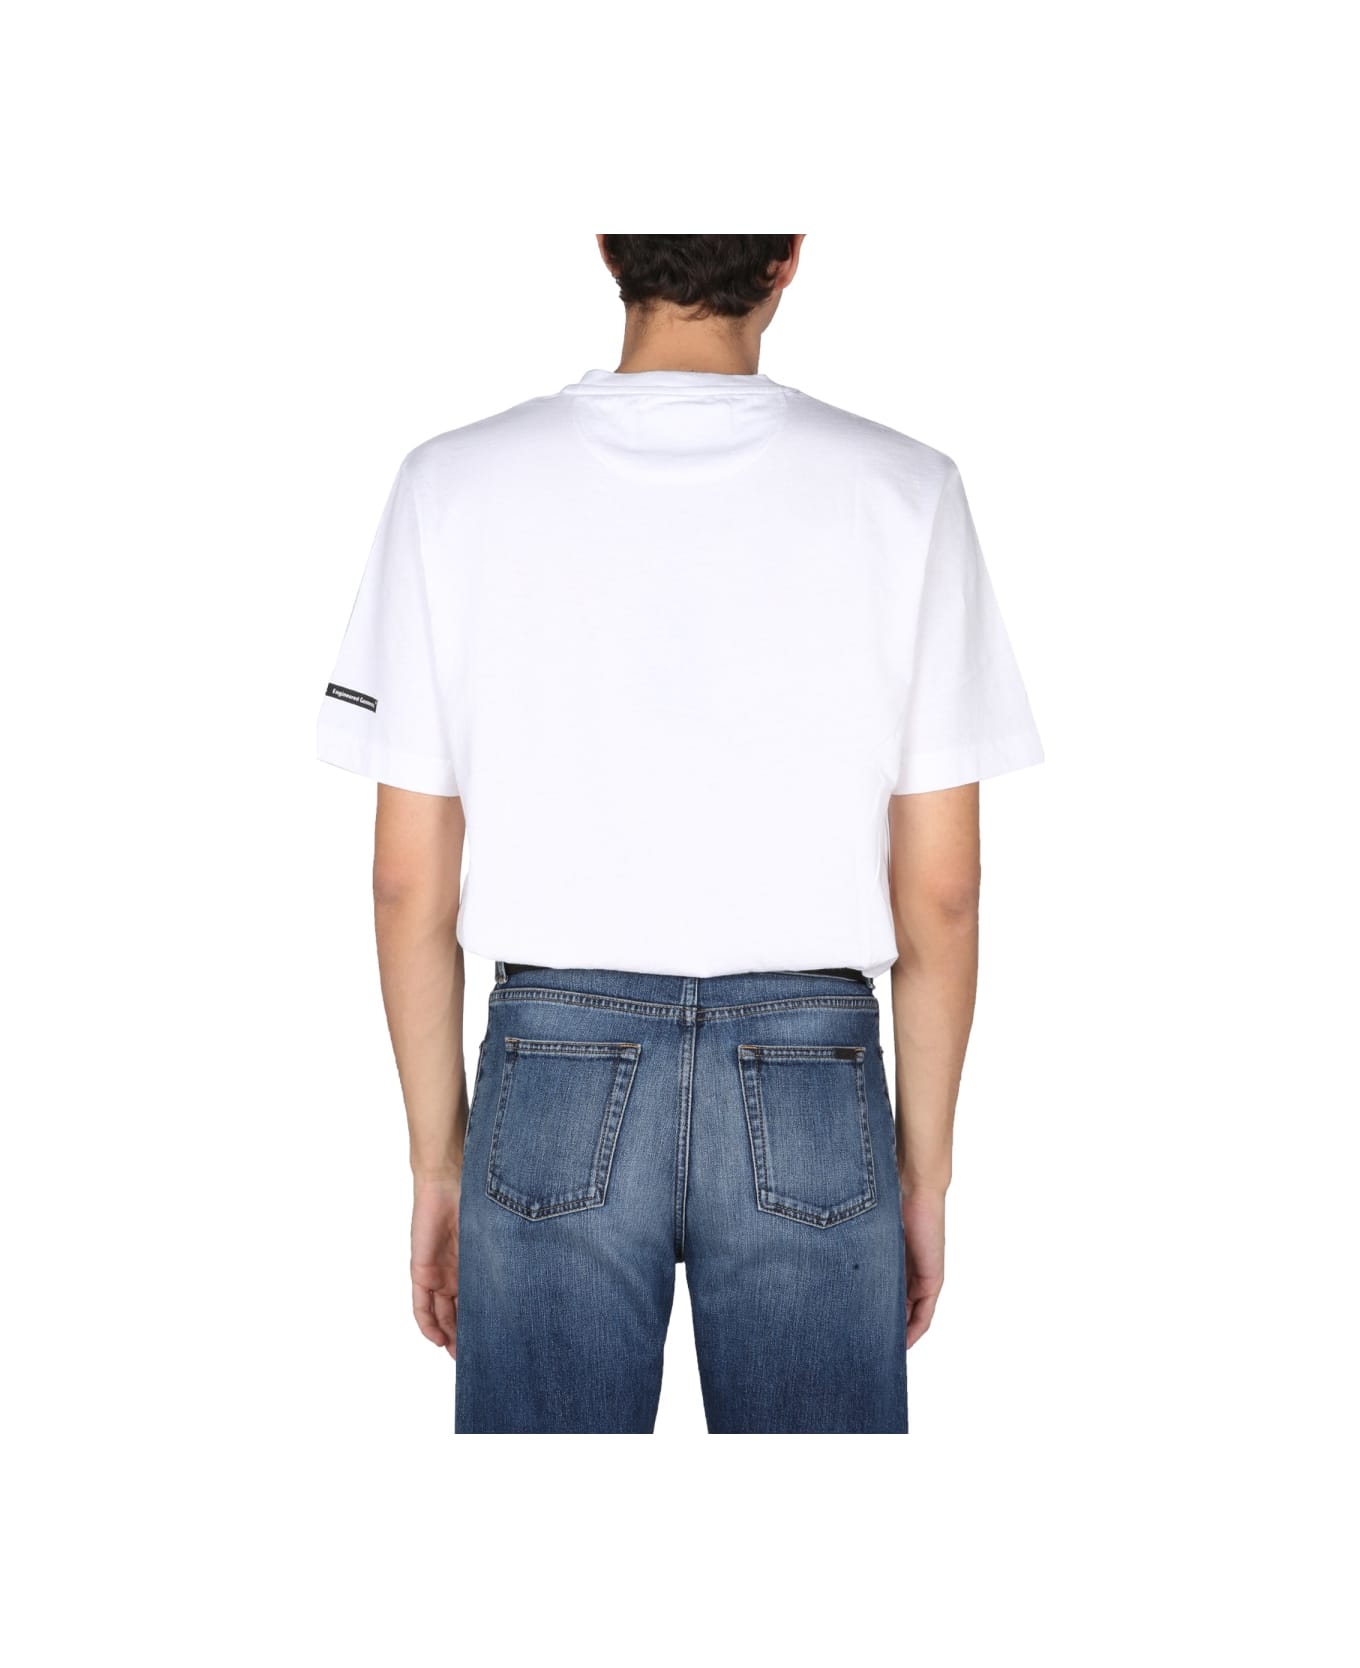 Barbour X Engineered Garments T-shirt - WHITE シャツ